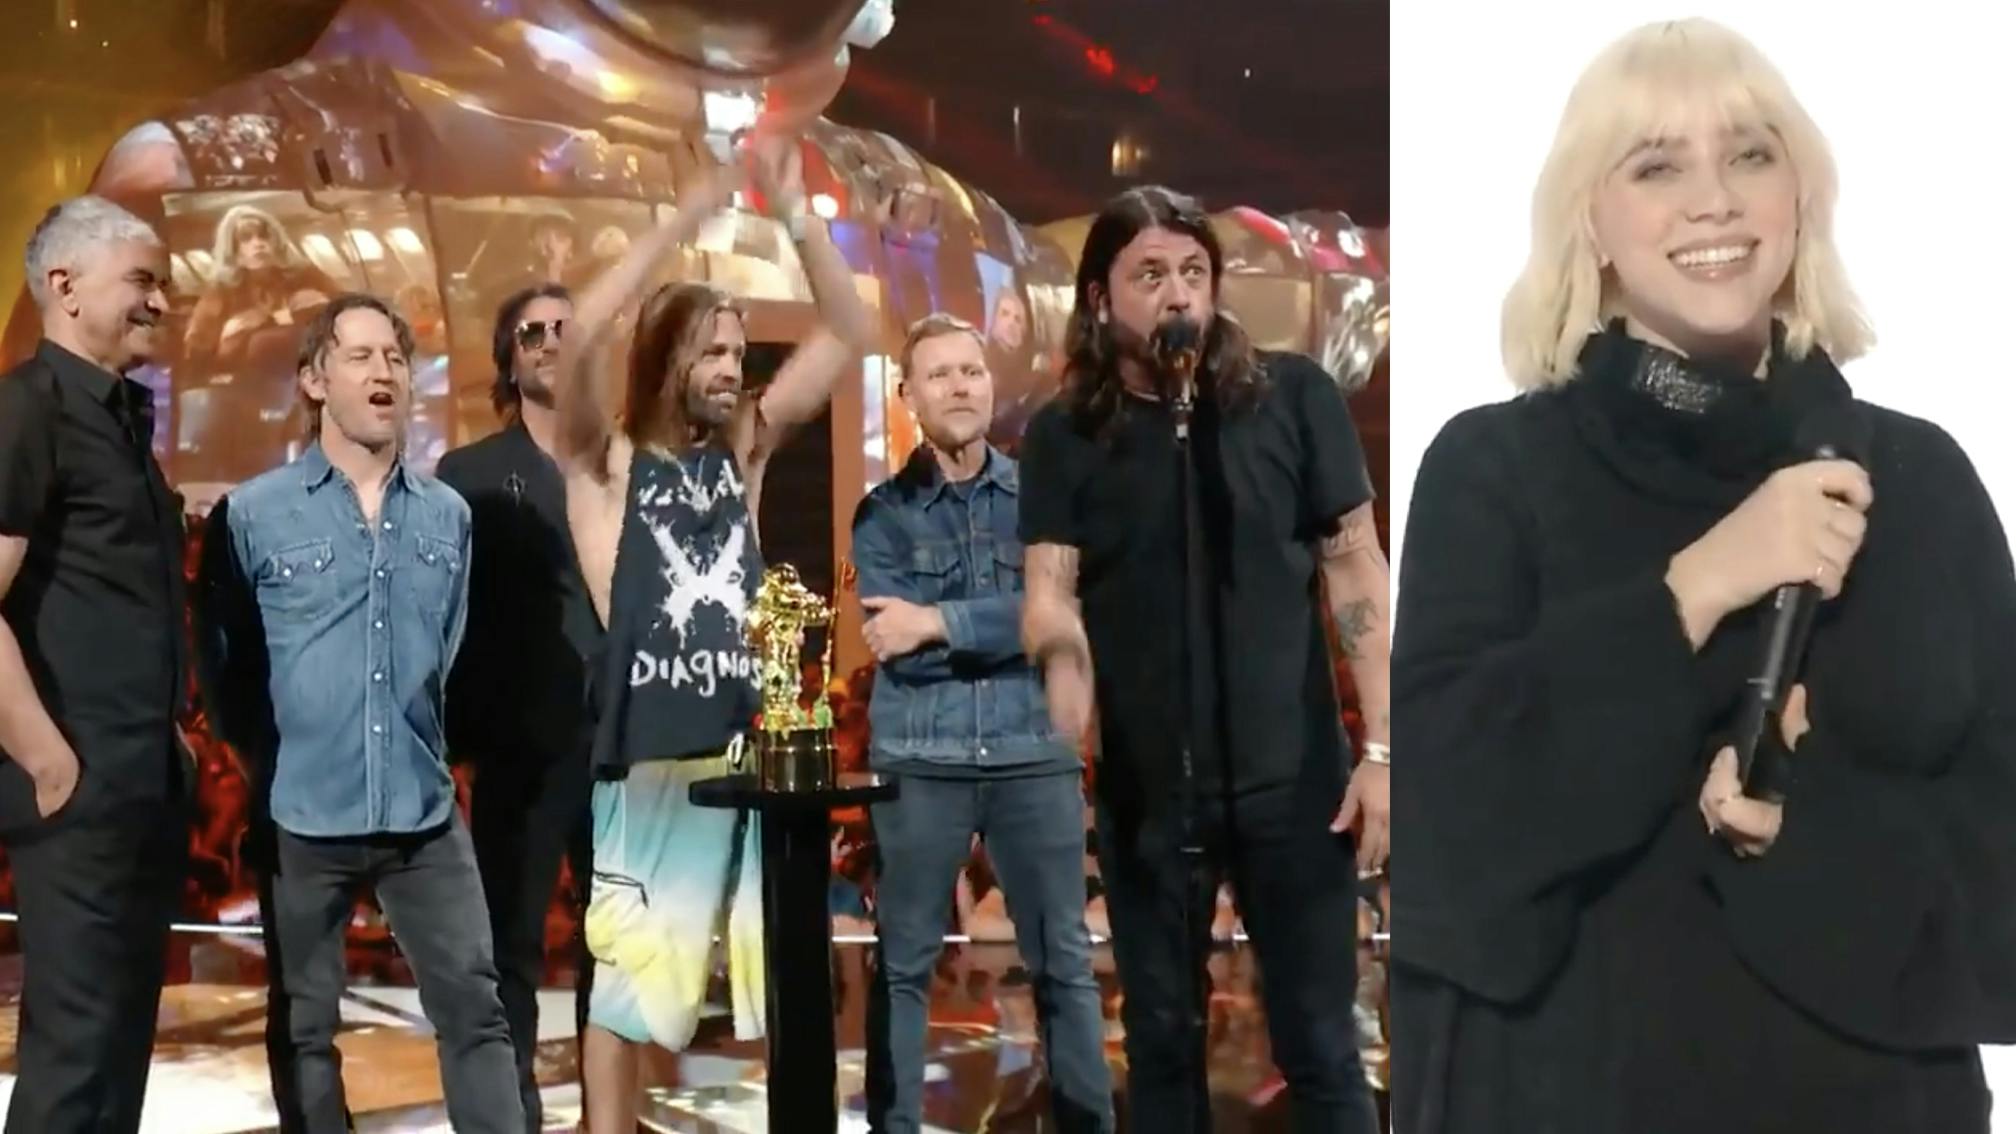 Billie Eilish introduces Foo Fighters at MTV VMAs: "They’ve carried the torch of rock'n'roll for 26 years…"